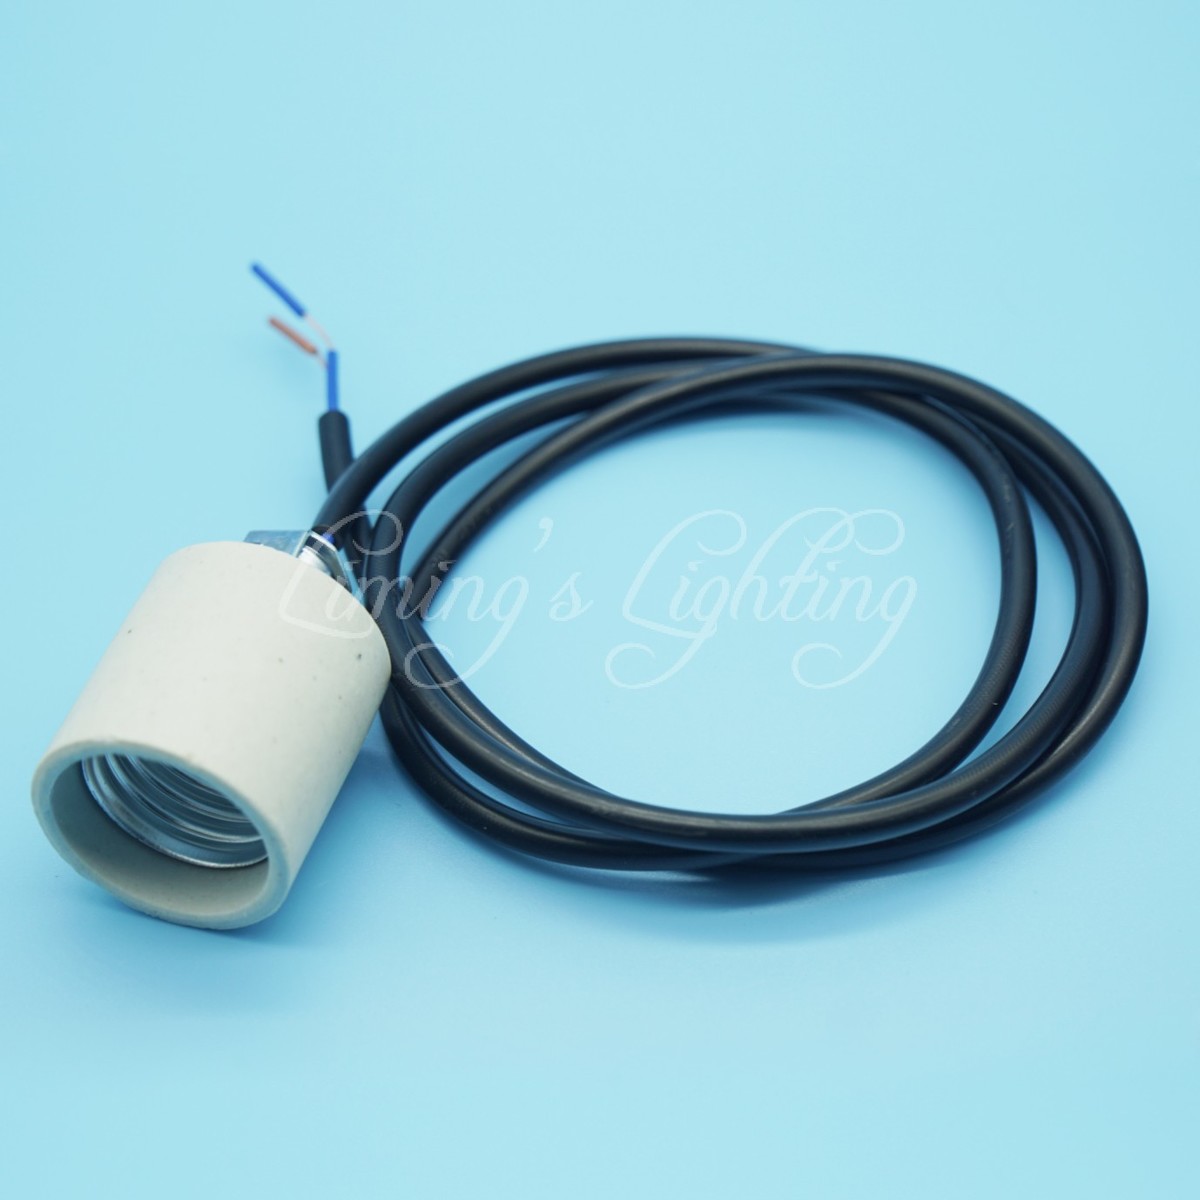 e27 lamp holder lighting accessories white e27 ceramic lamp holder with 1m pvc cable wire for diy pendant light lamp base